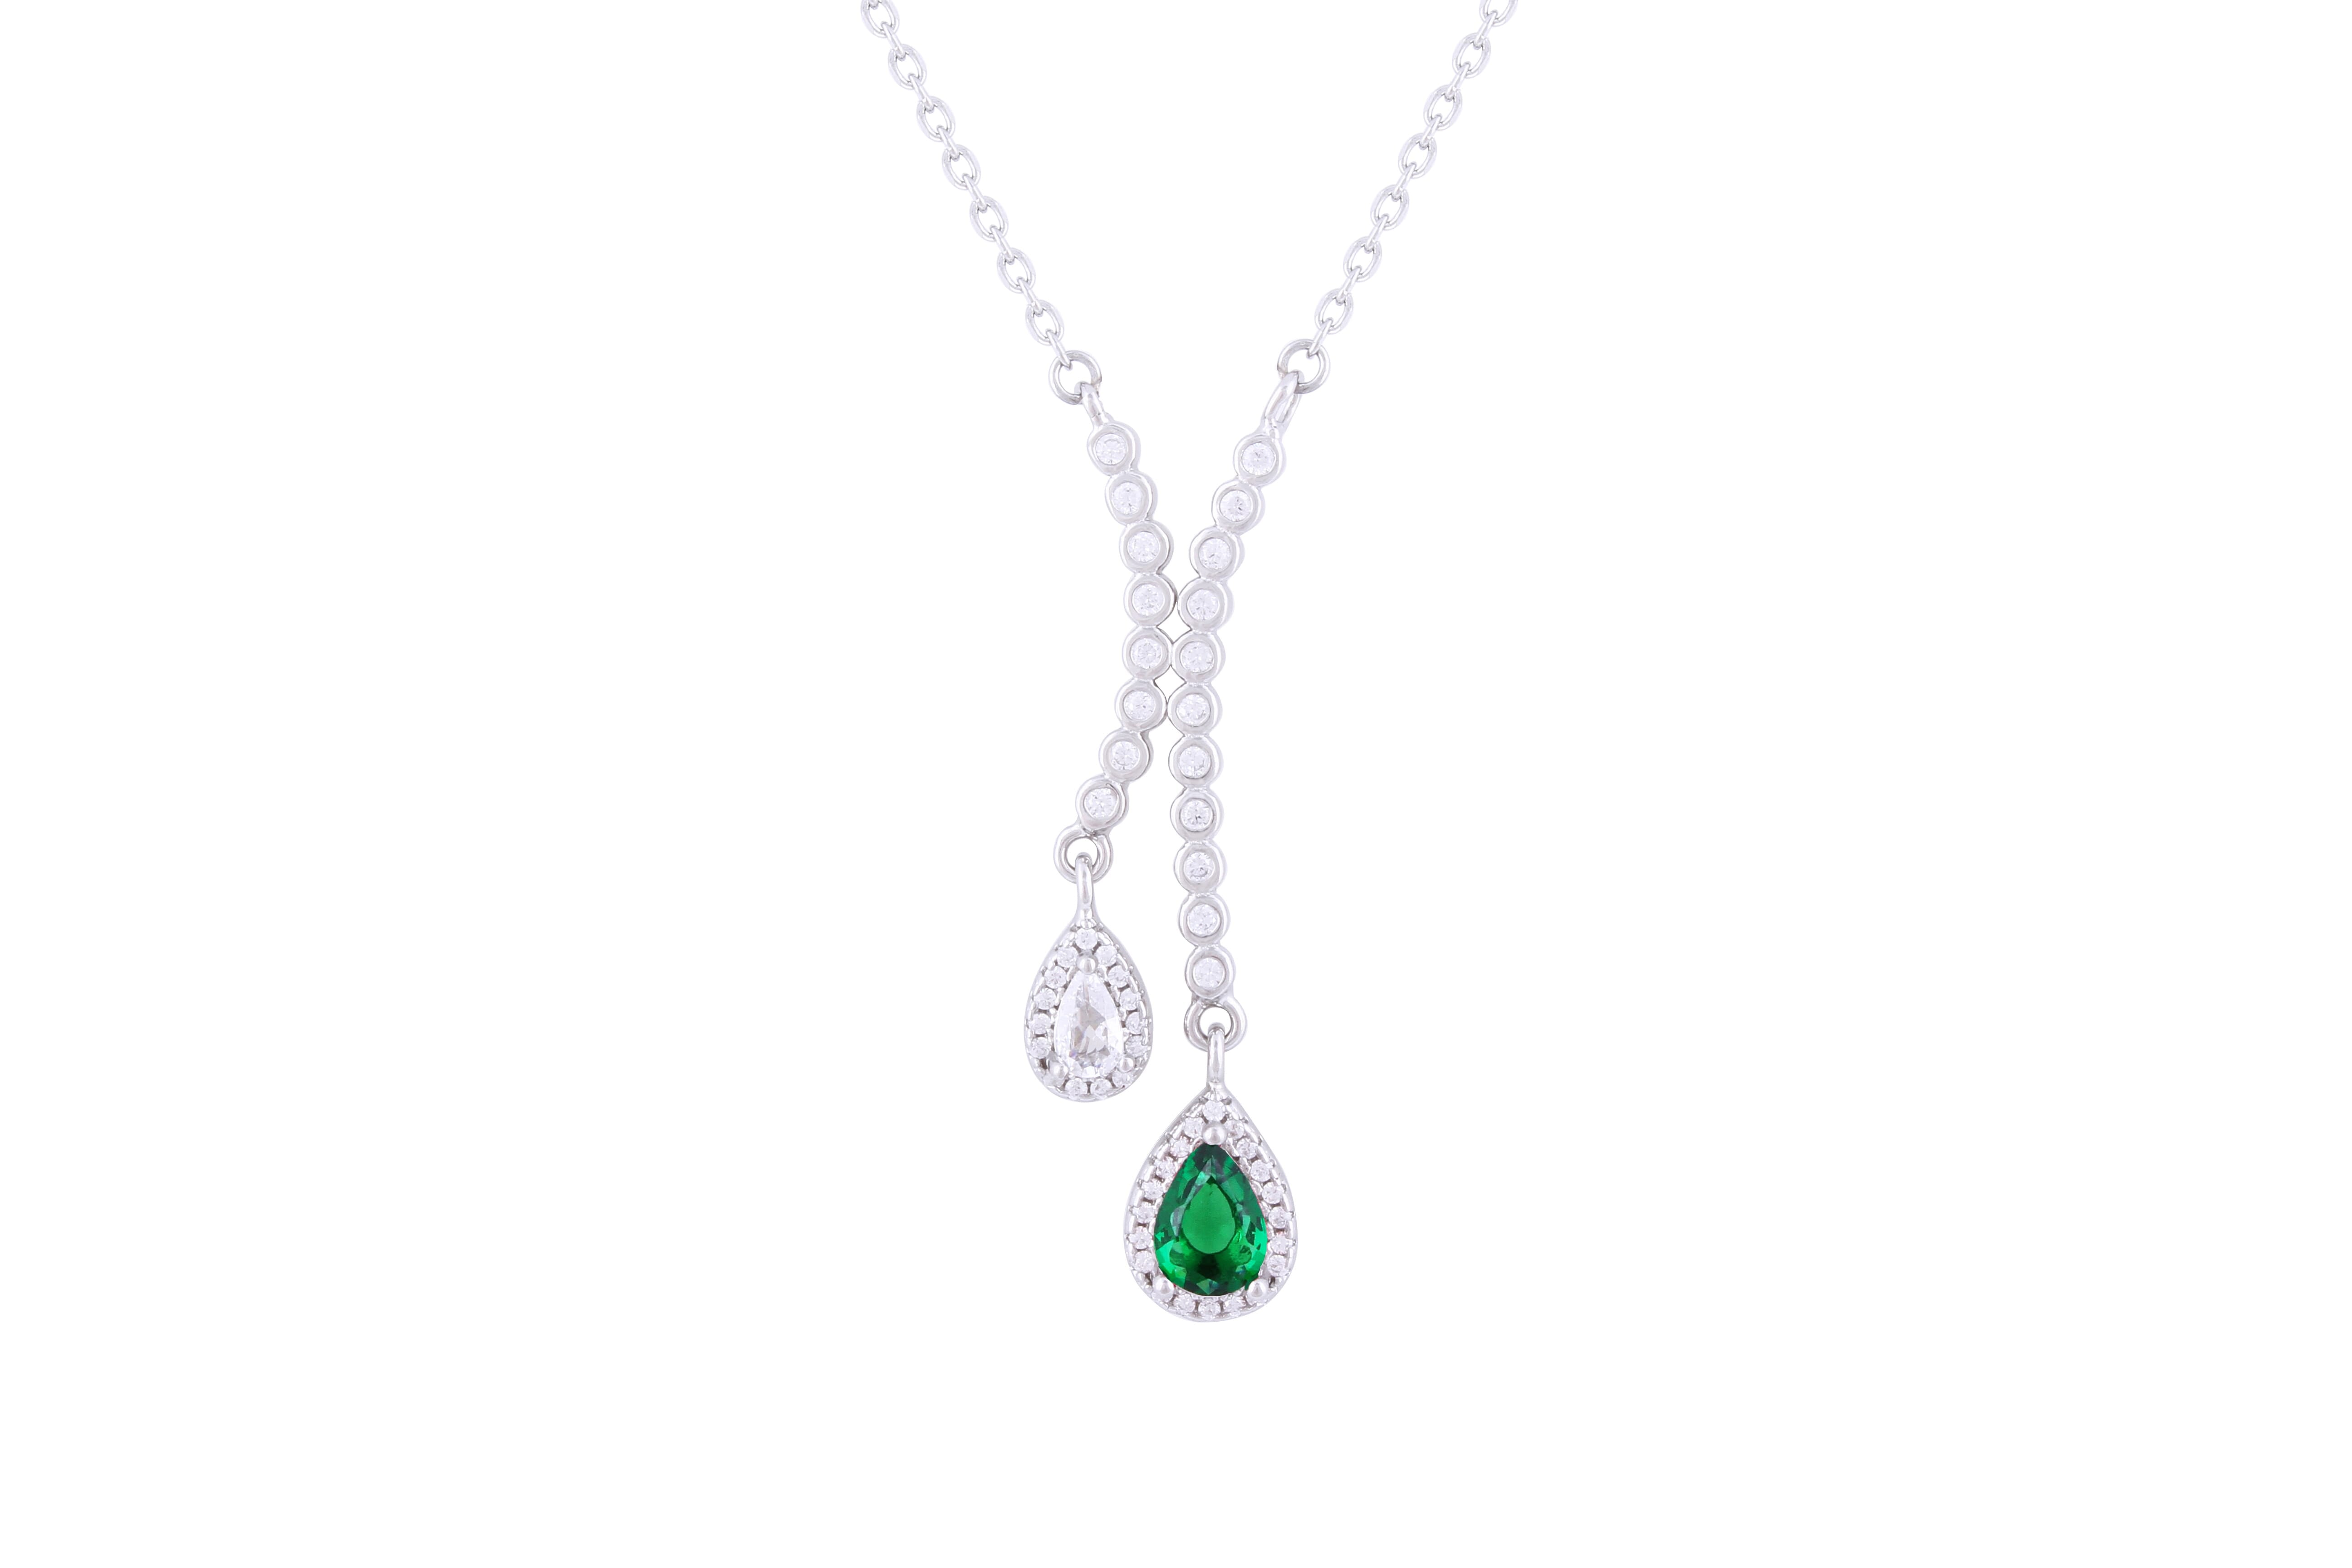 Asfour 925 Sterling Silver Necklace Inlaid With Green Pear Stone NR0497-WG